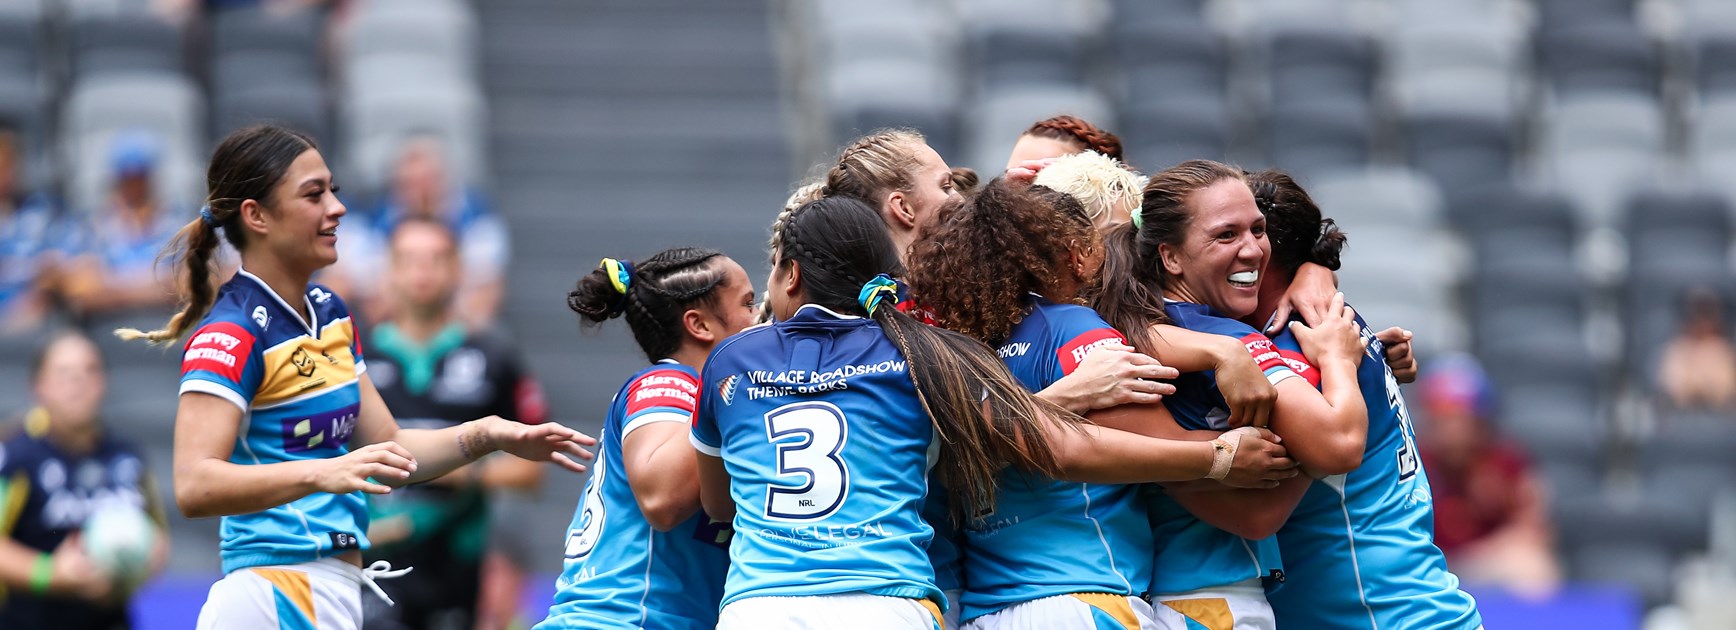 Raiders, Wests Tigers, Sharks, Cowboys to join NRLW in 2023